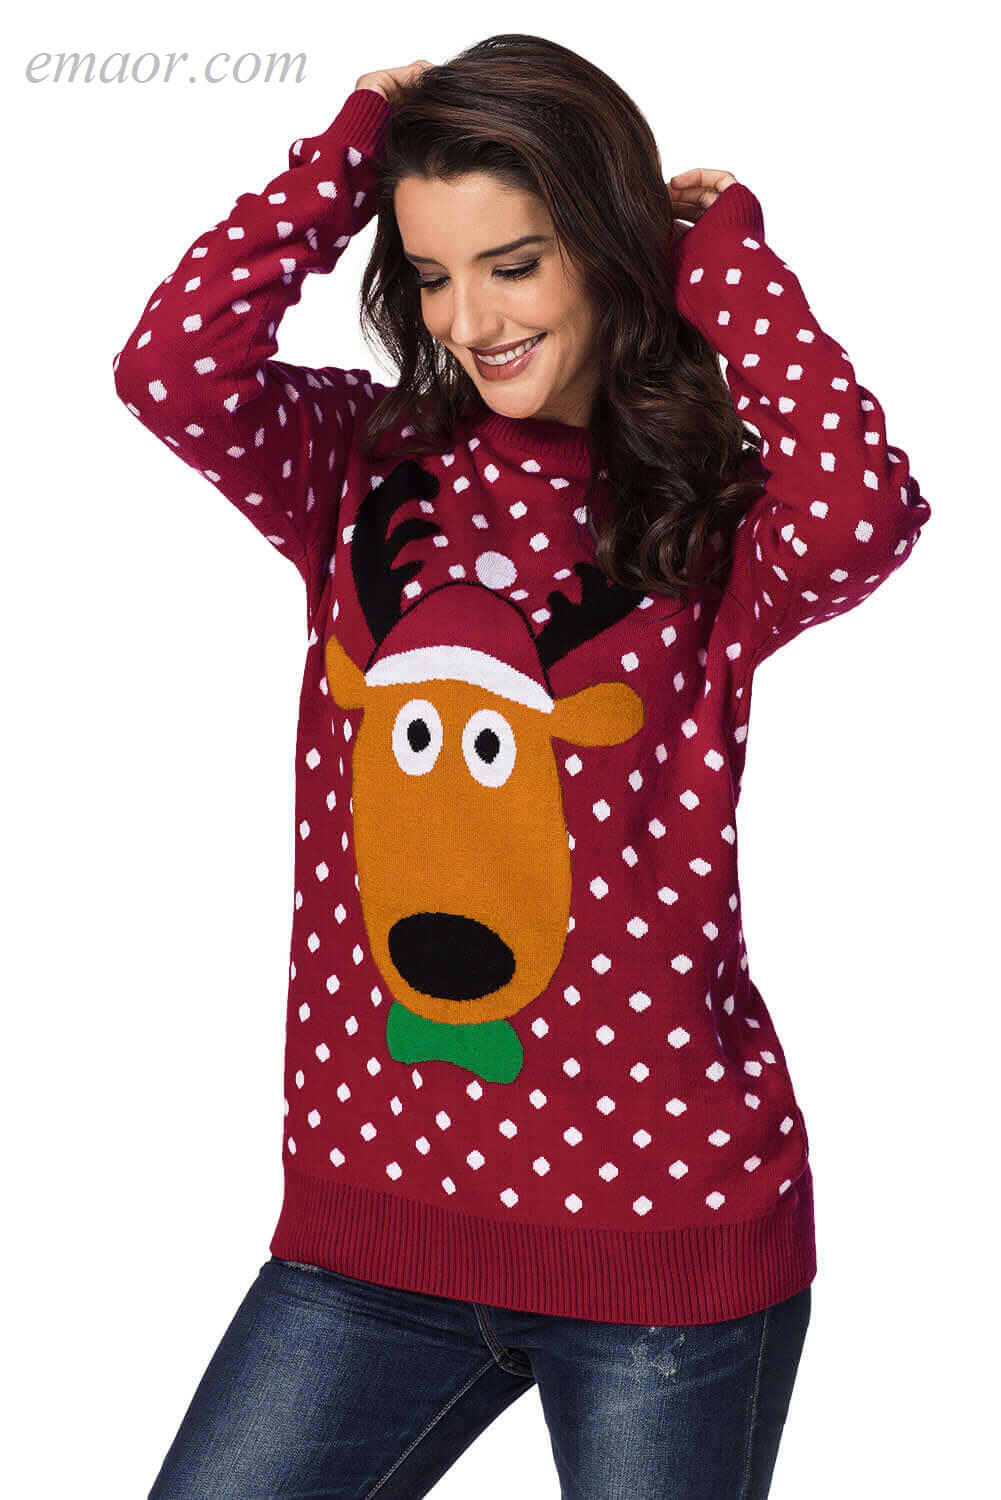 Sweater Christmas for Women Reindeer Red Christmas Spring Outerwear Women's Round Collar Outerwear Sweater